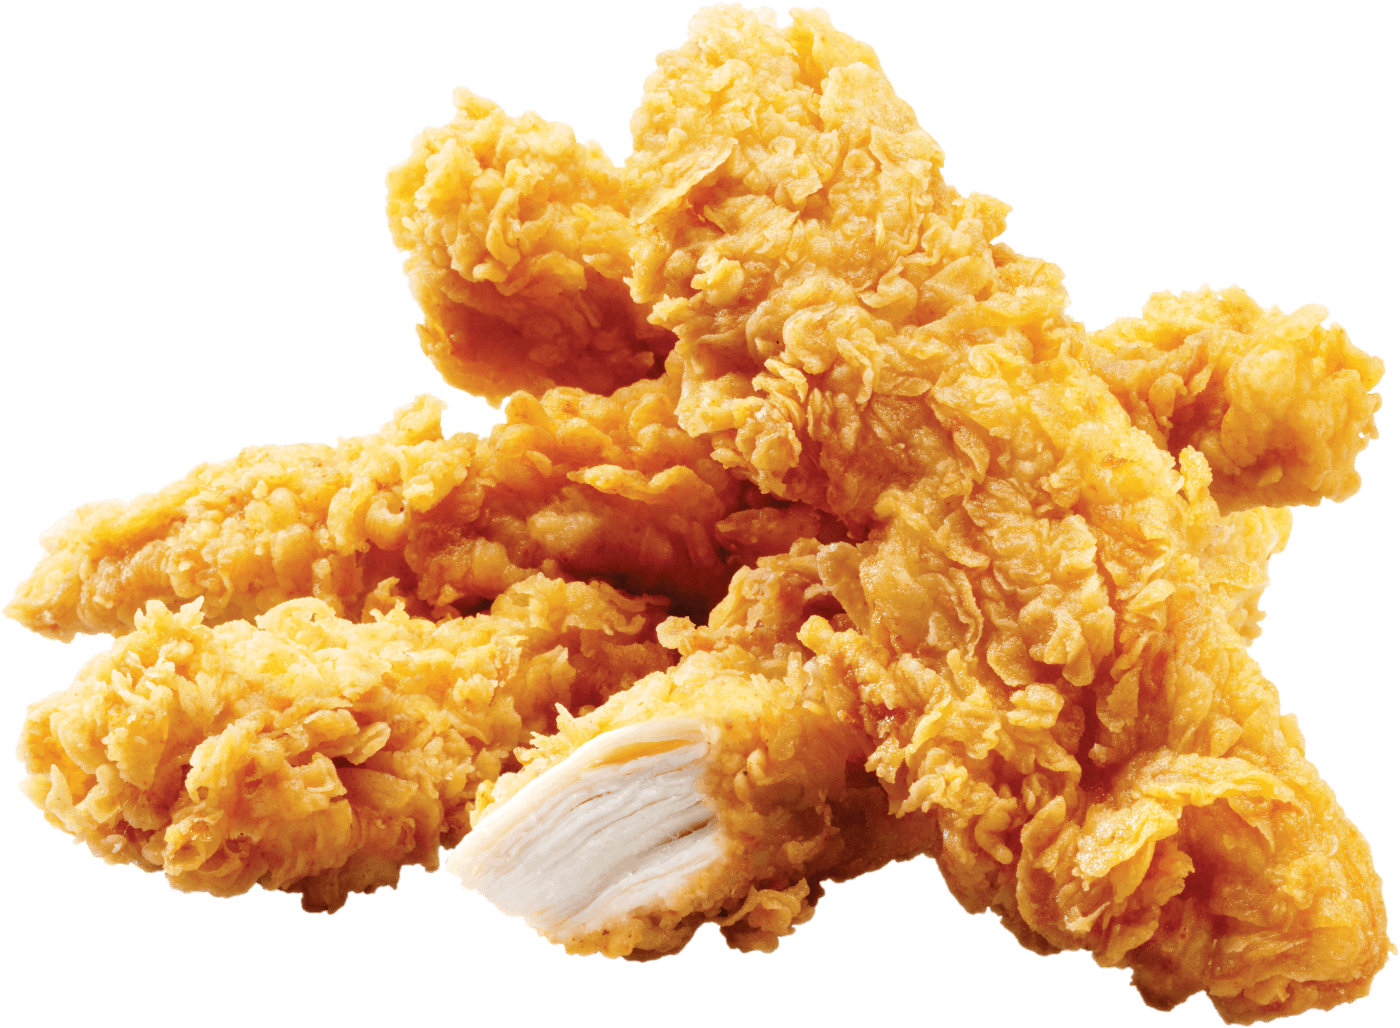 Chicken Crunchy Kfc Free Clipart HQ PNG Image